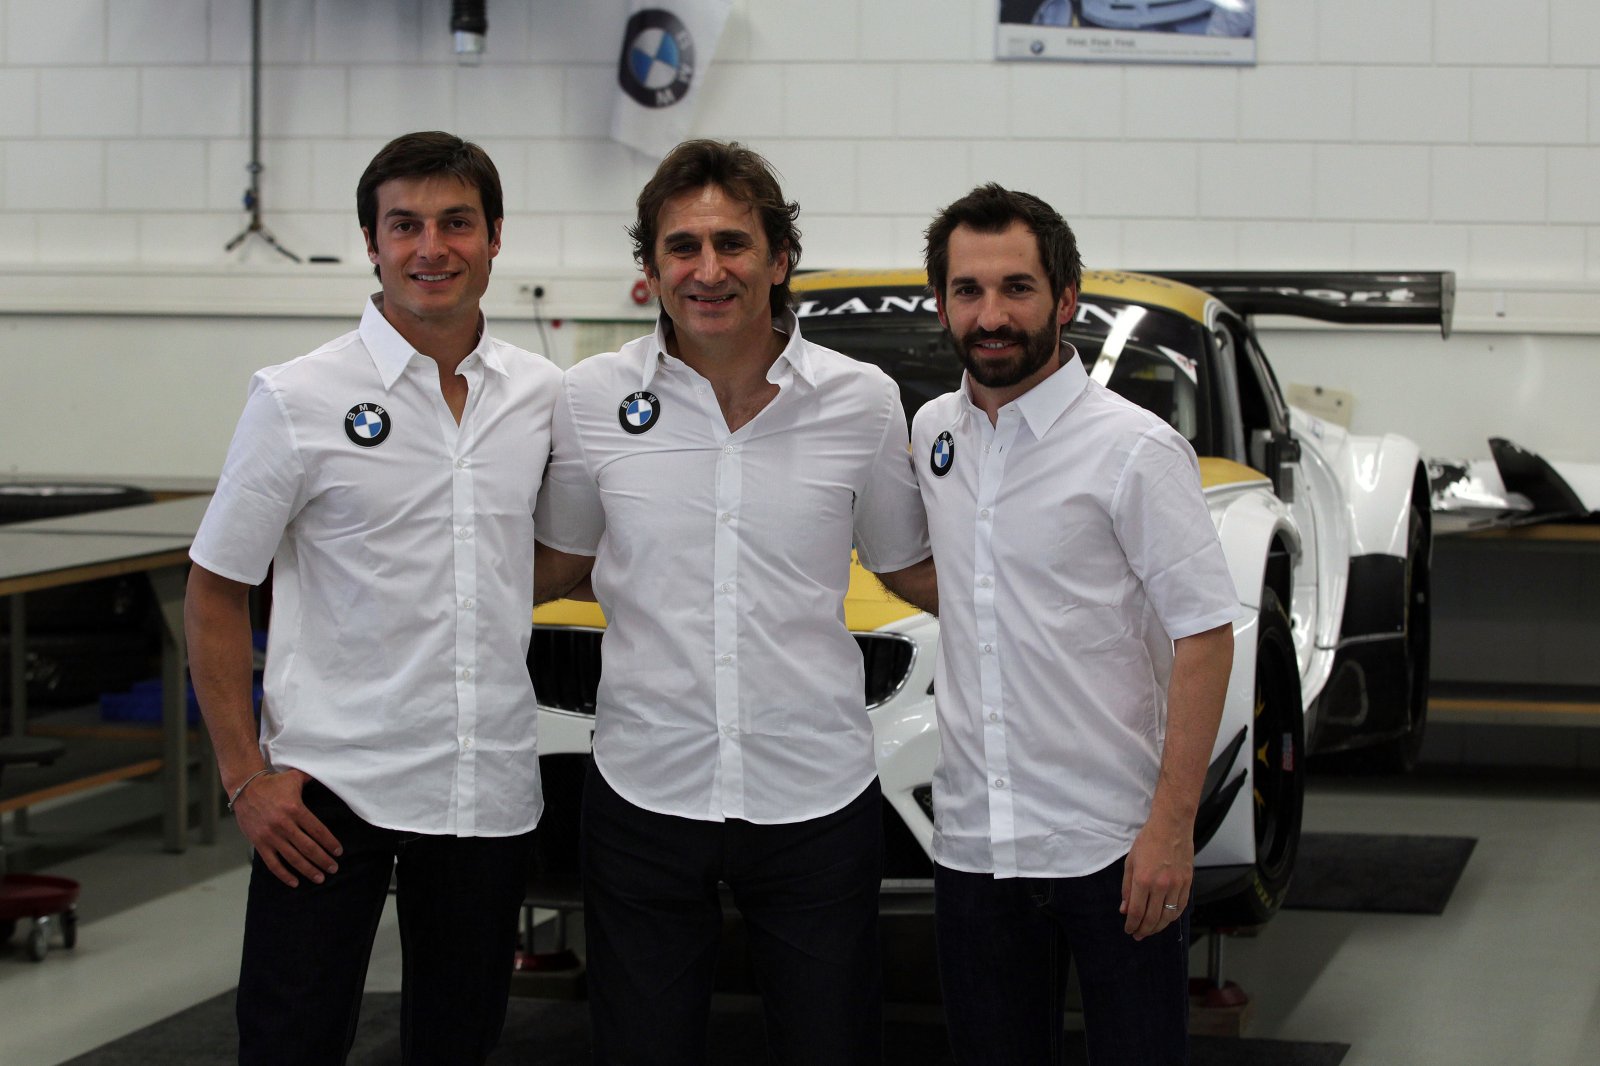 Timo Glock and Bruno Spengler team up with Alex Zanardi for Total 24 Hours of Spa